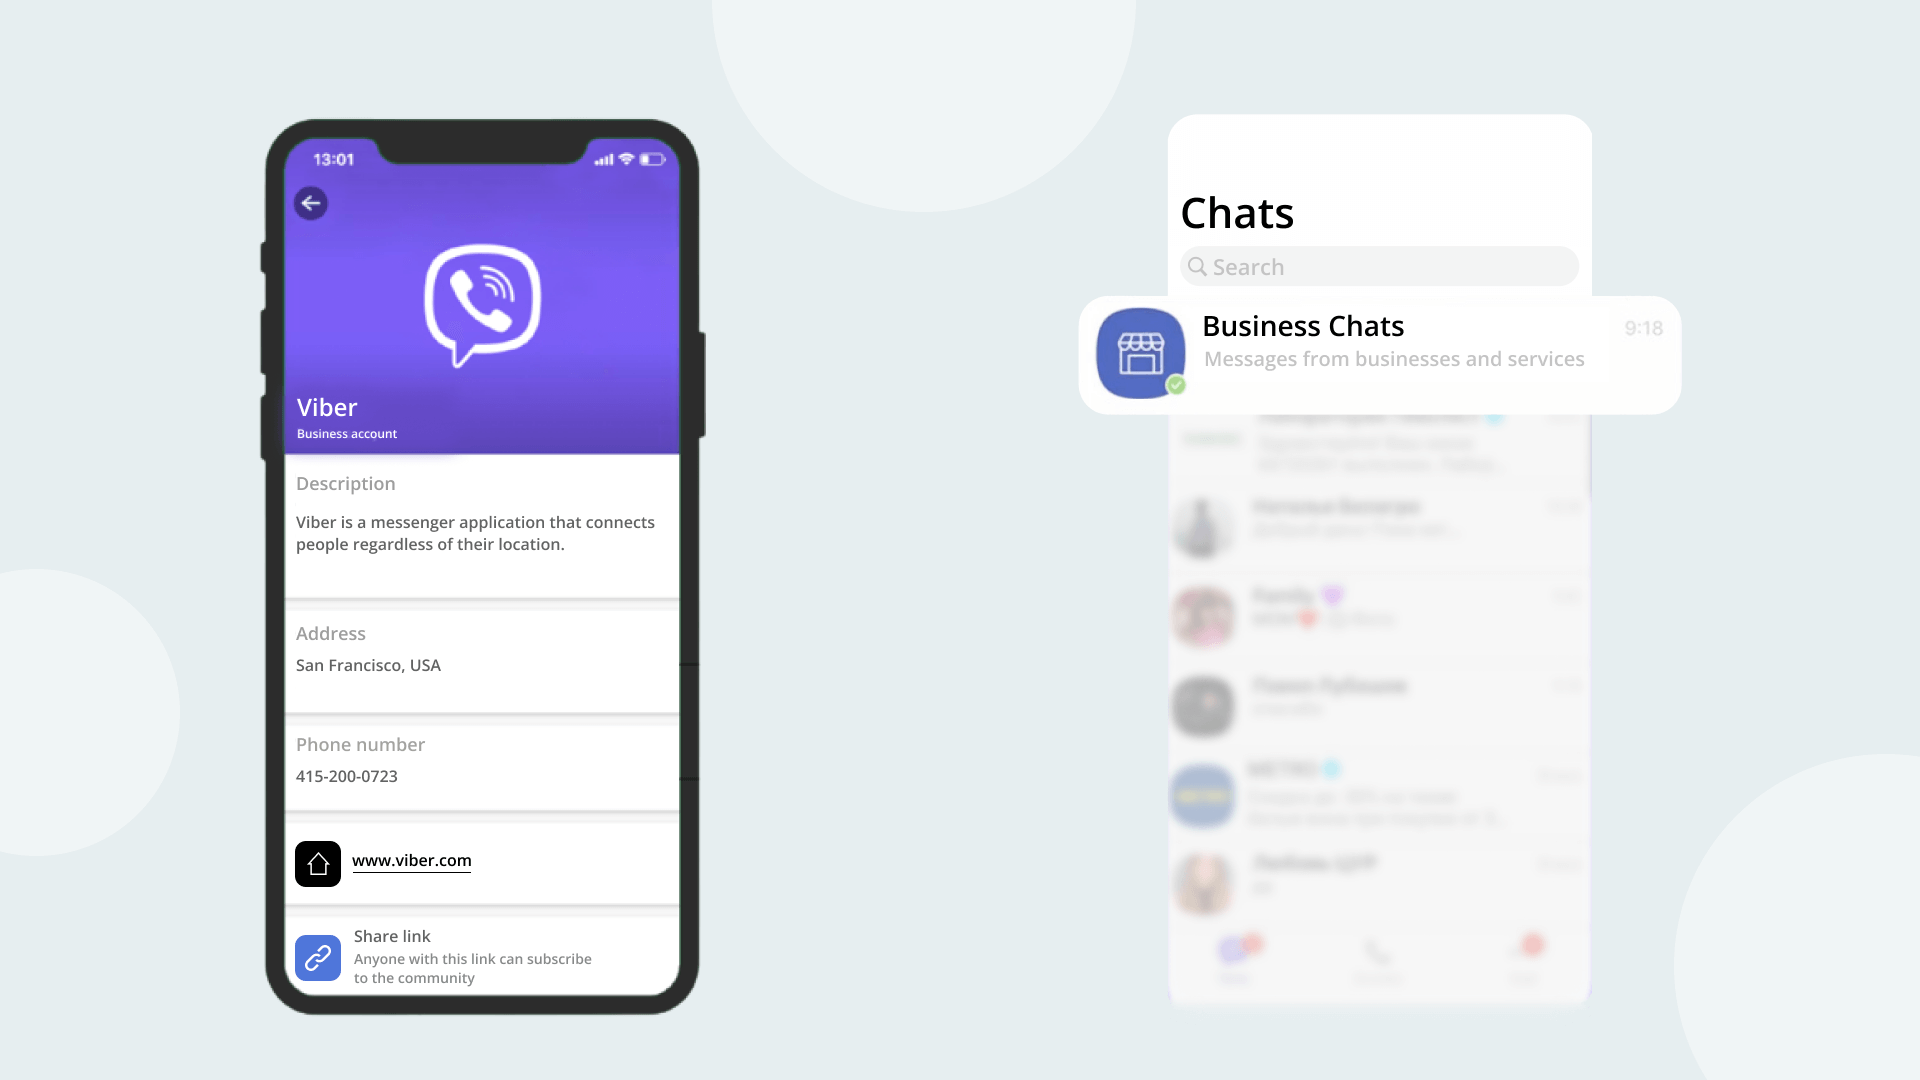 Viber Business Profile interface and Viber Business Chats in the user’s Viber app